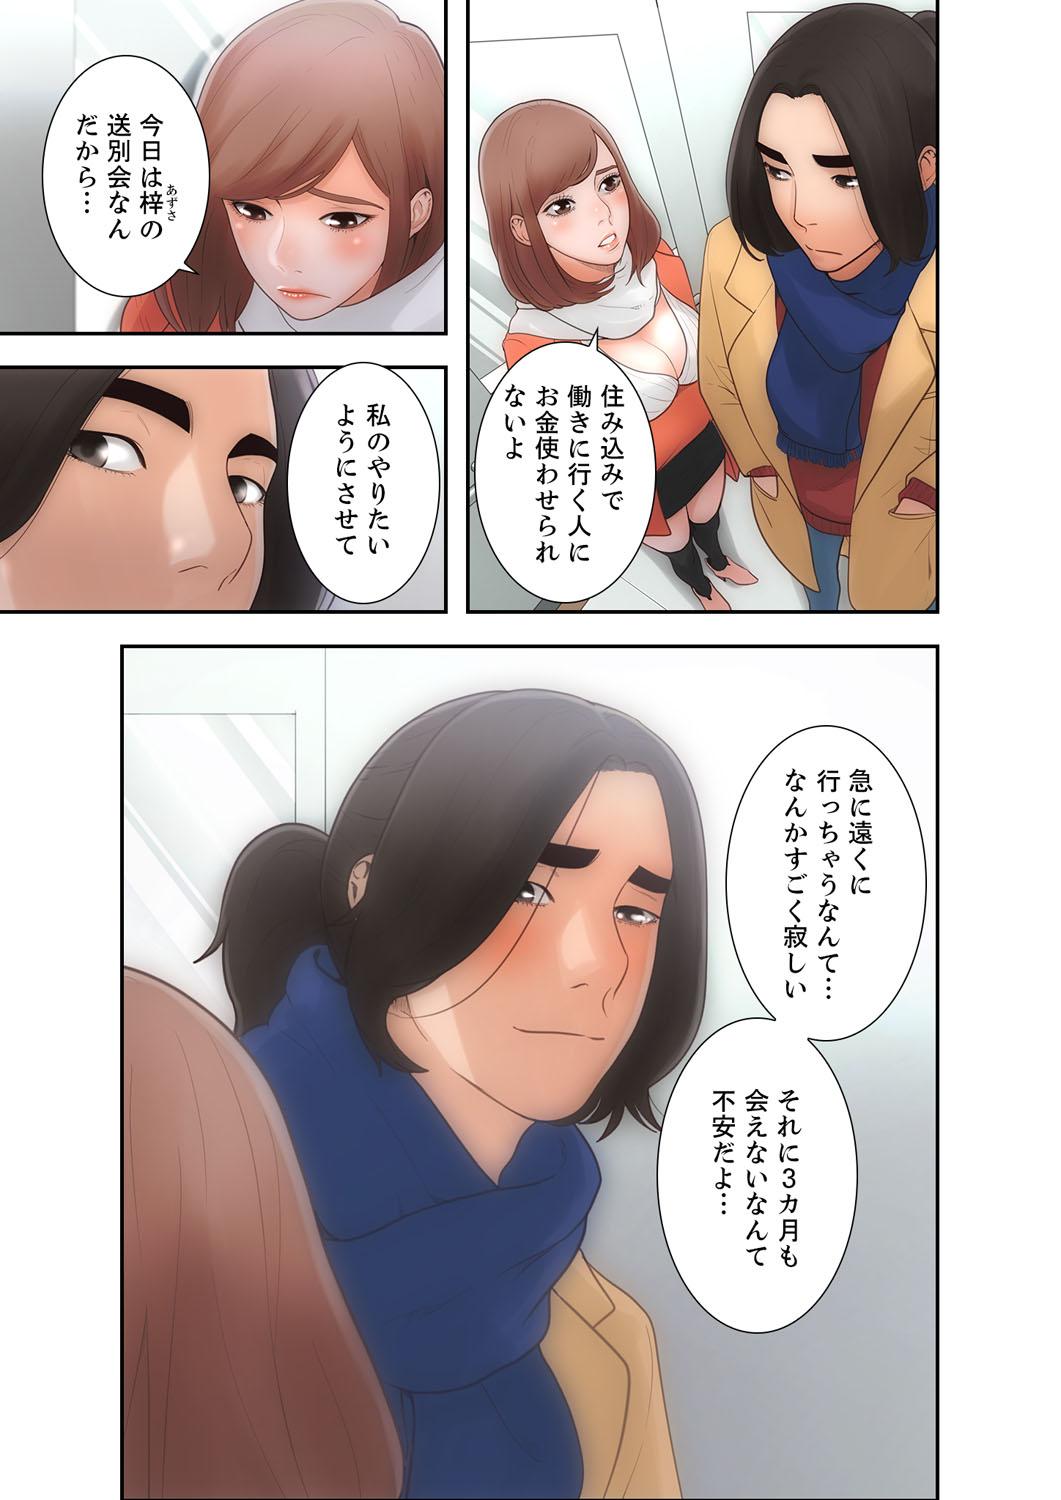 Nut 解禁 1-5 Bisexual - Page 7